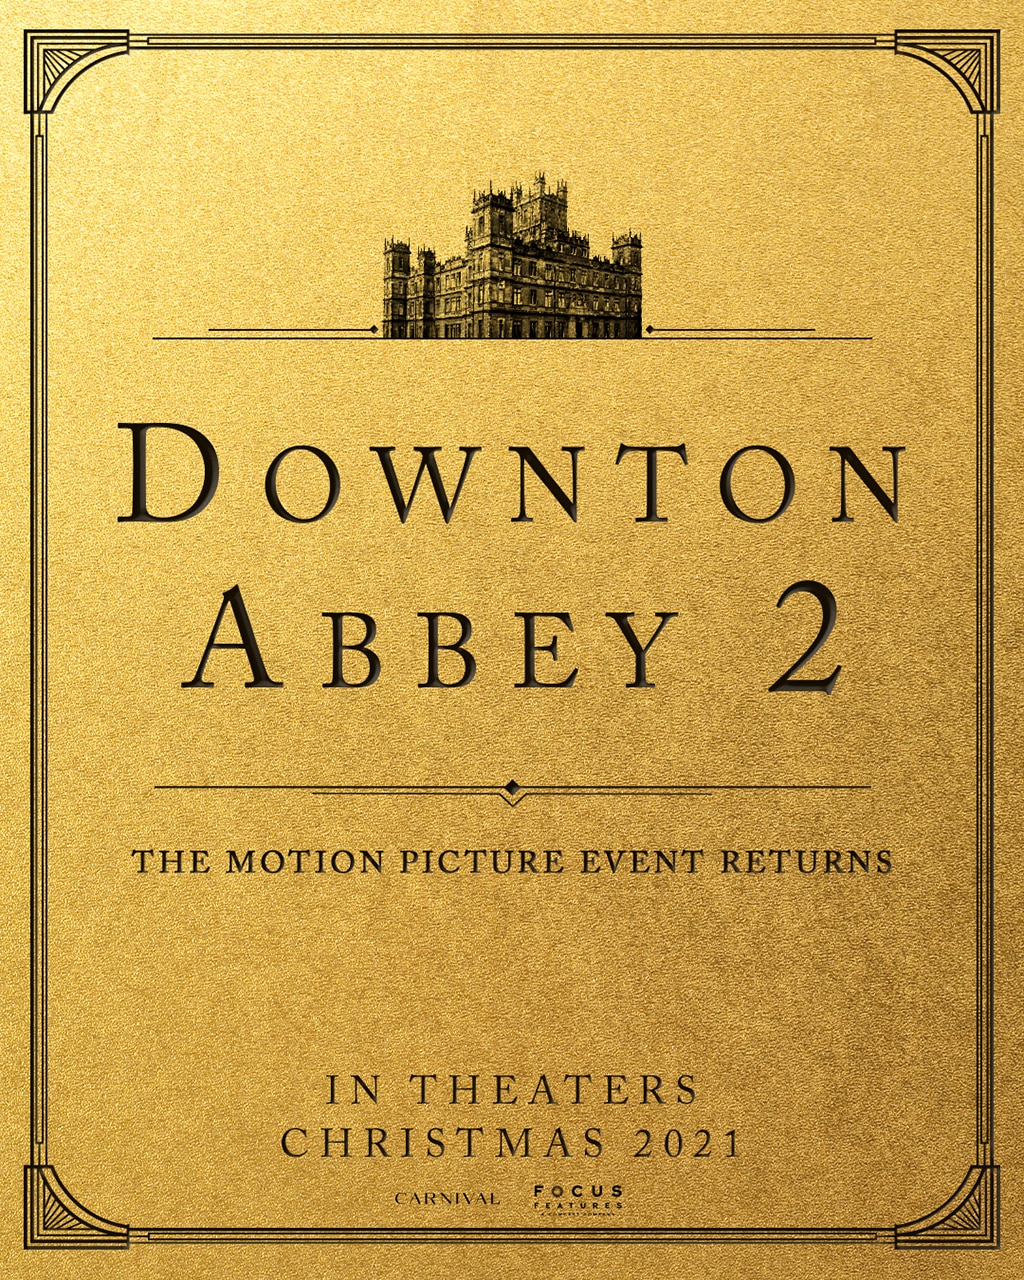 Downton Abbey 2 Is Coming Just in Time for the Holidays